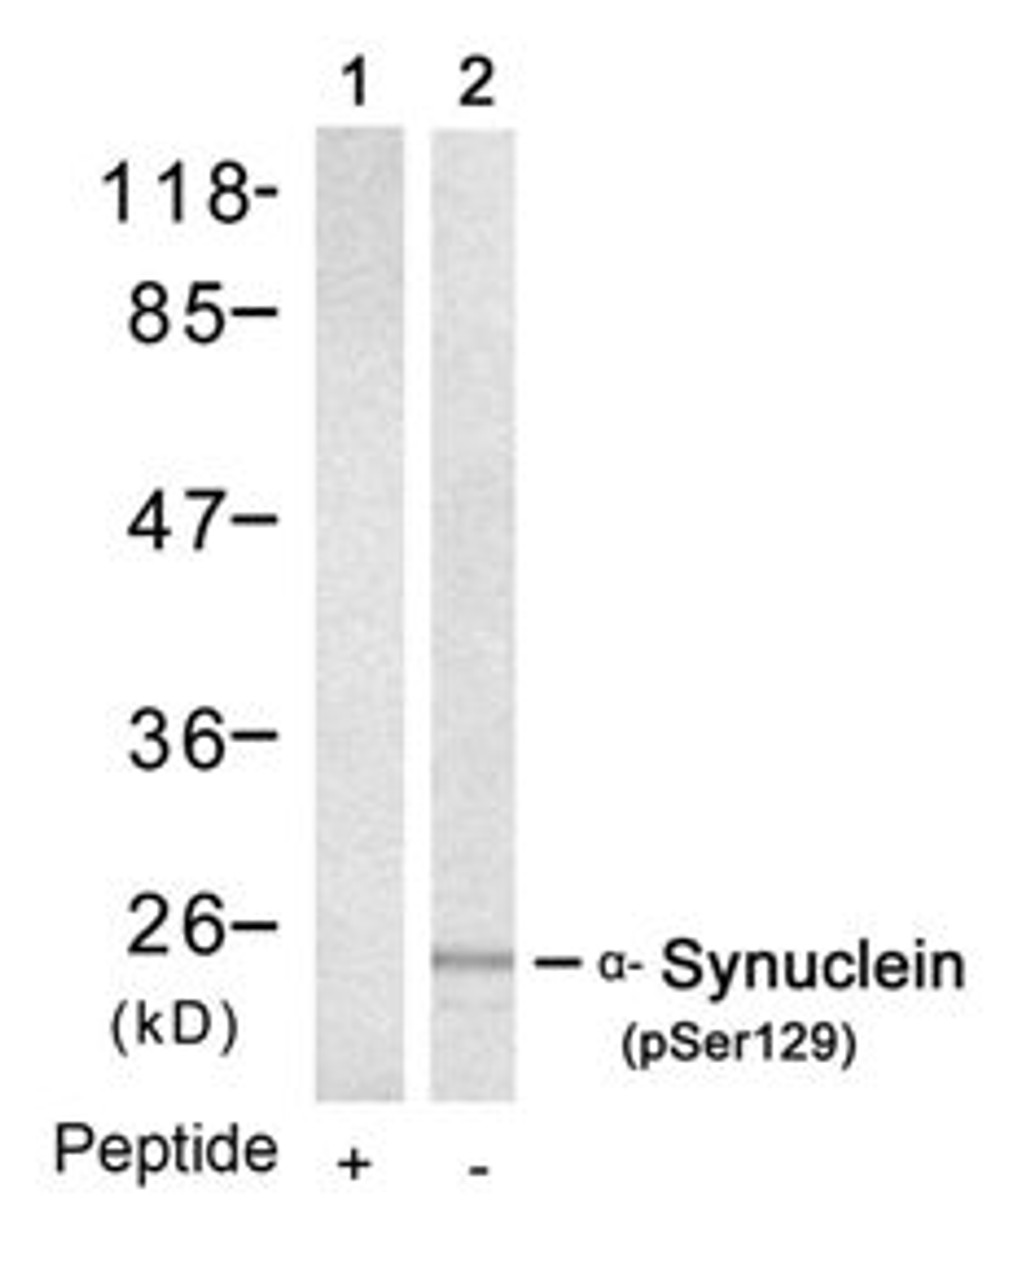 Western blot analysis of lysed extracts from mouse brain tissue using &#945;-Synuclein (Phospho-Ser129) .